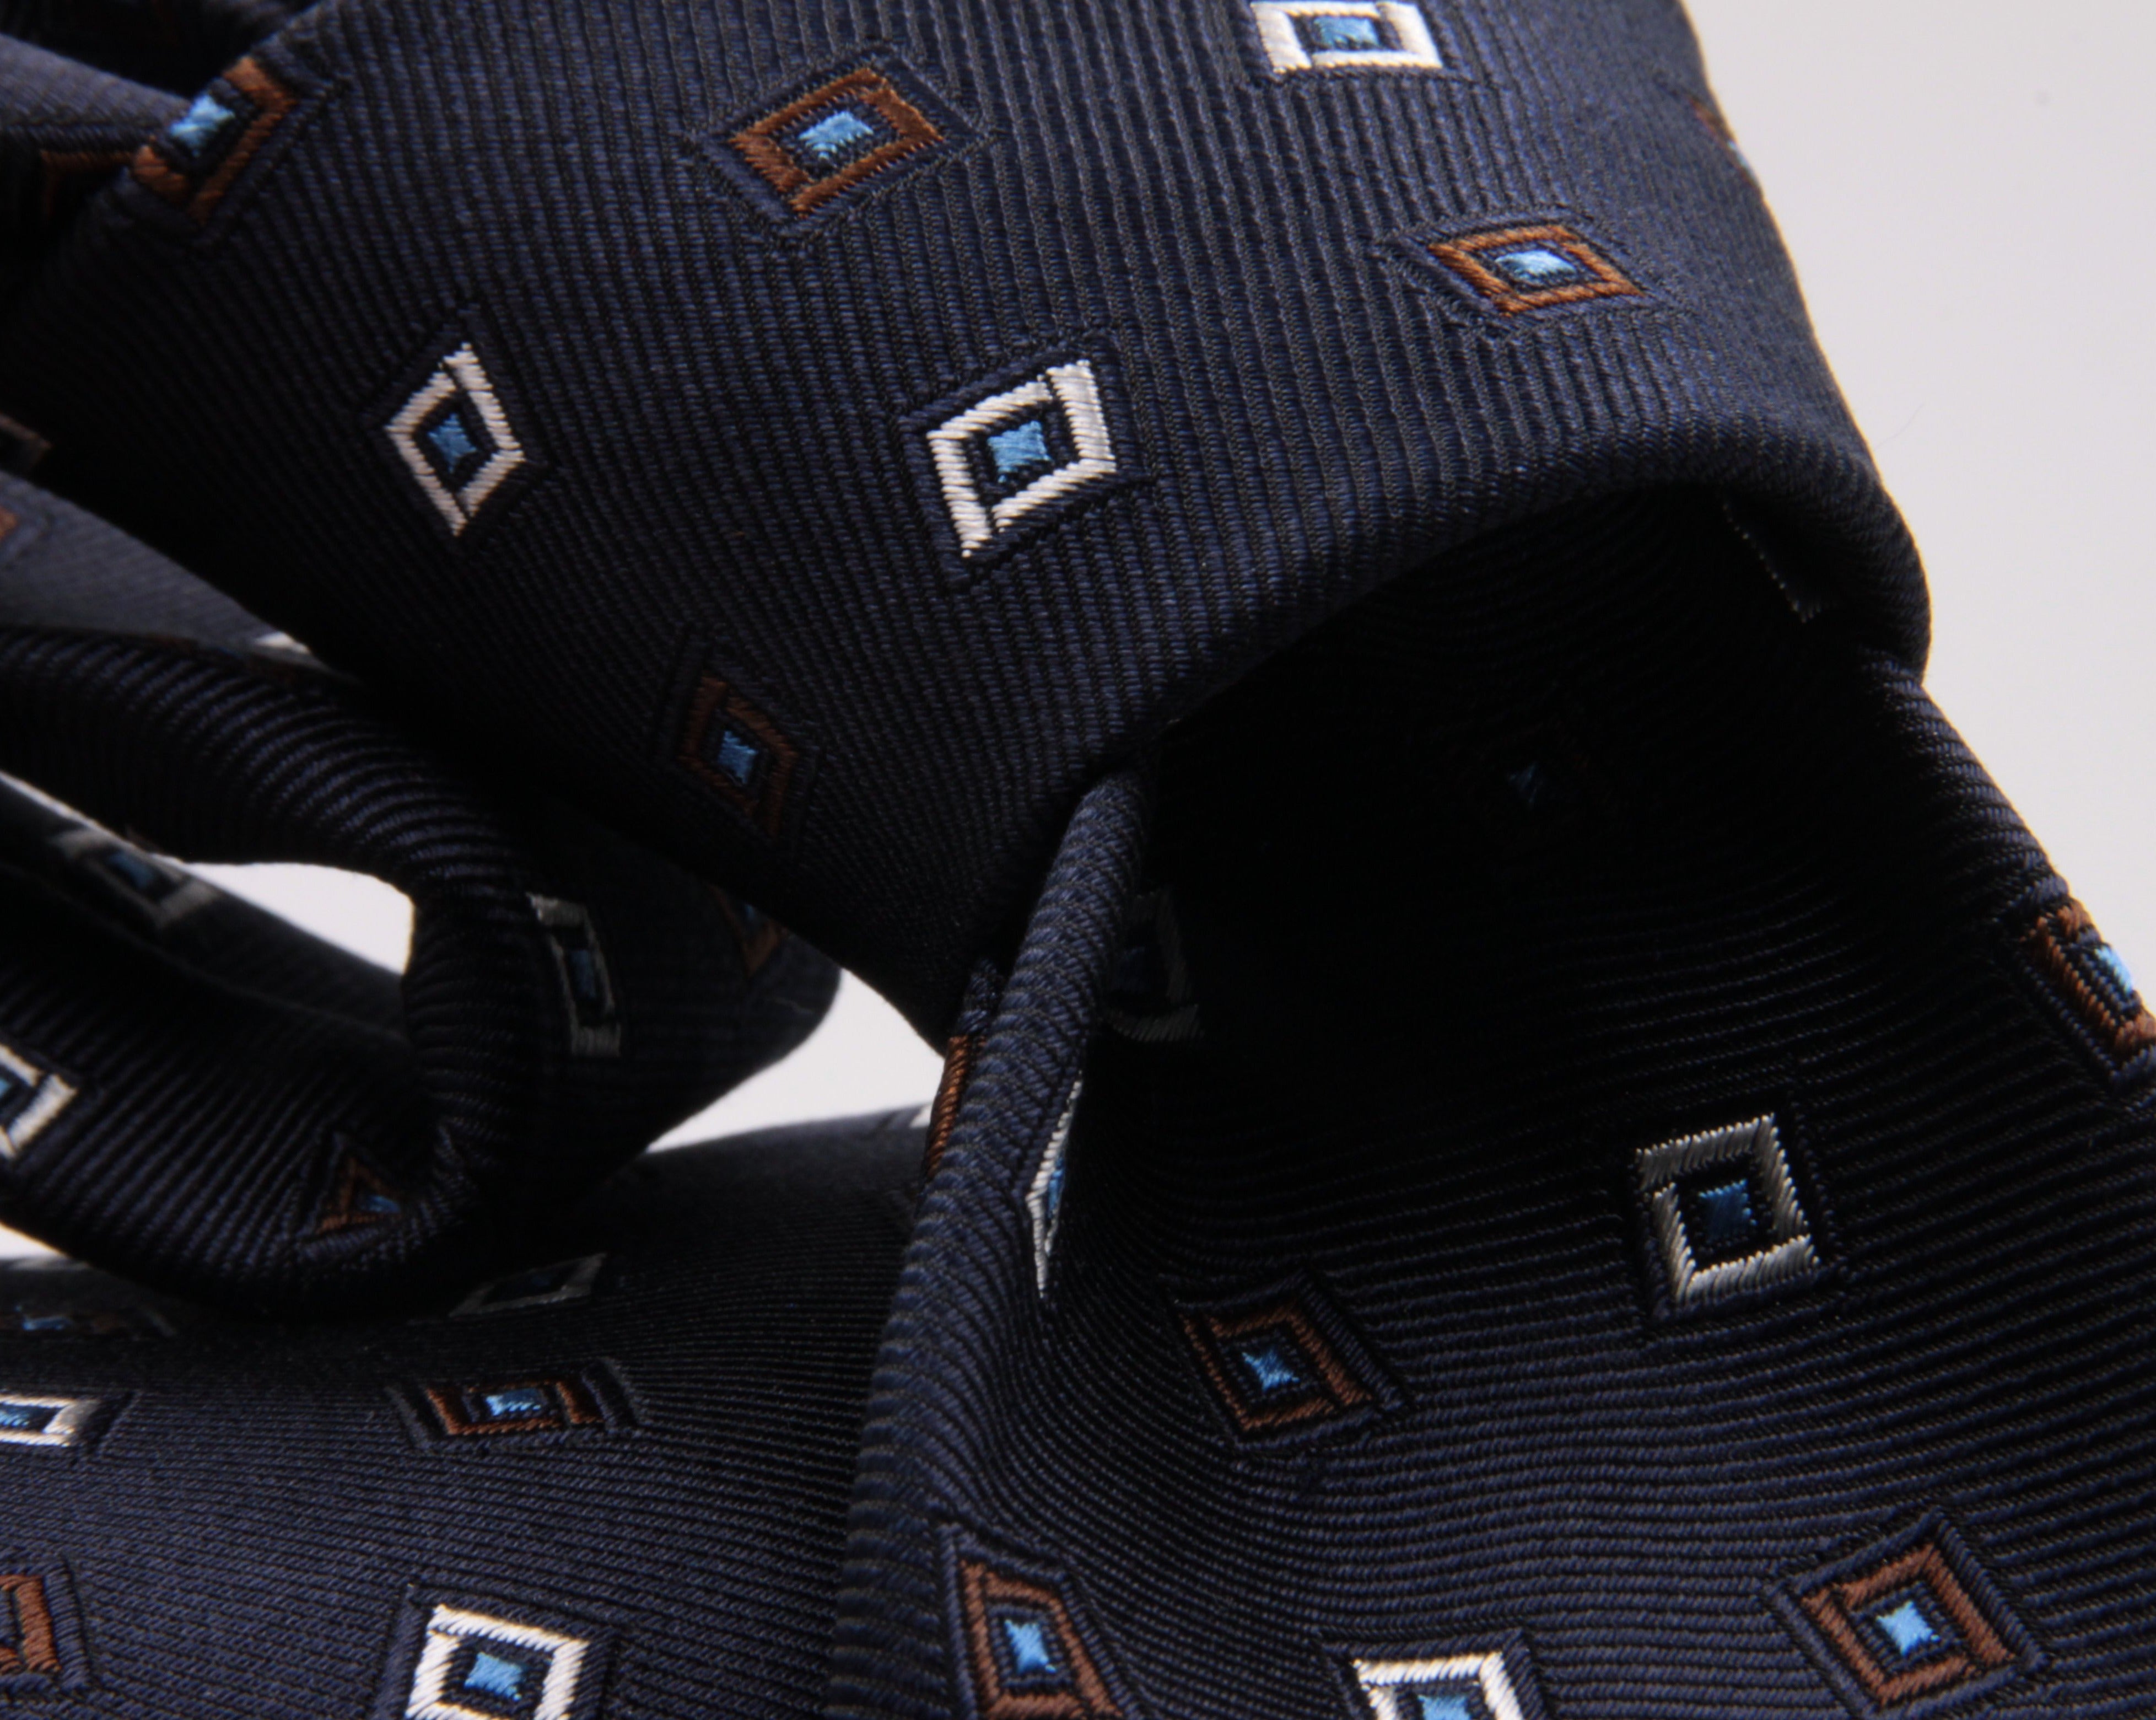 Cruciani & Bella 100% Silk Jacquard  Tipped Blue, White, Brown, and Light Blue Square Motif  Tie Handmade in Italy 8 cm x 150 cm #3133